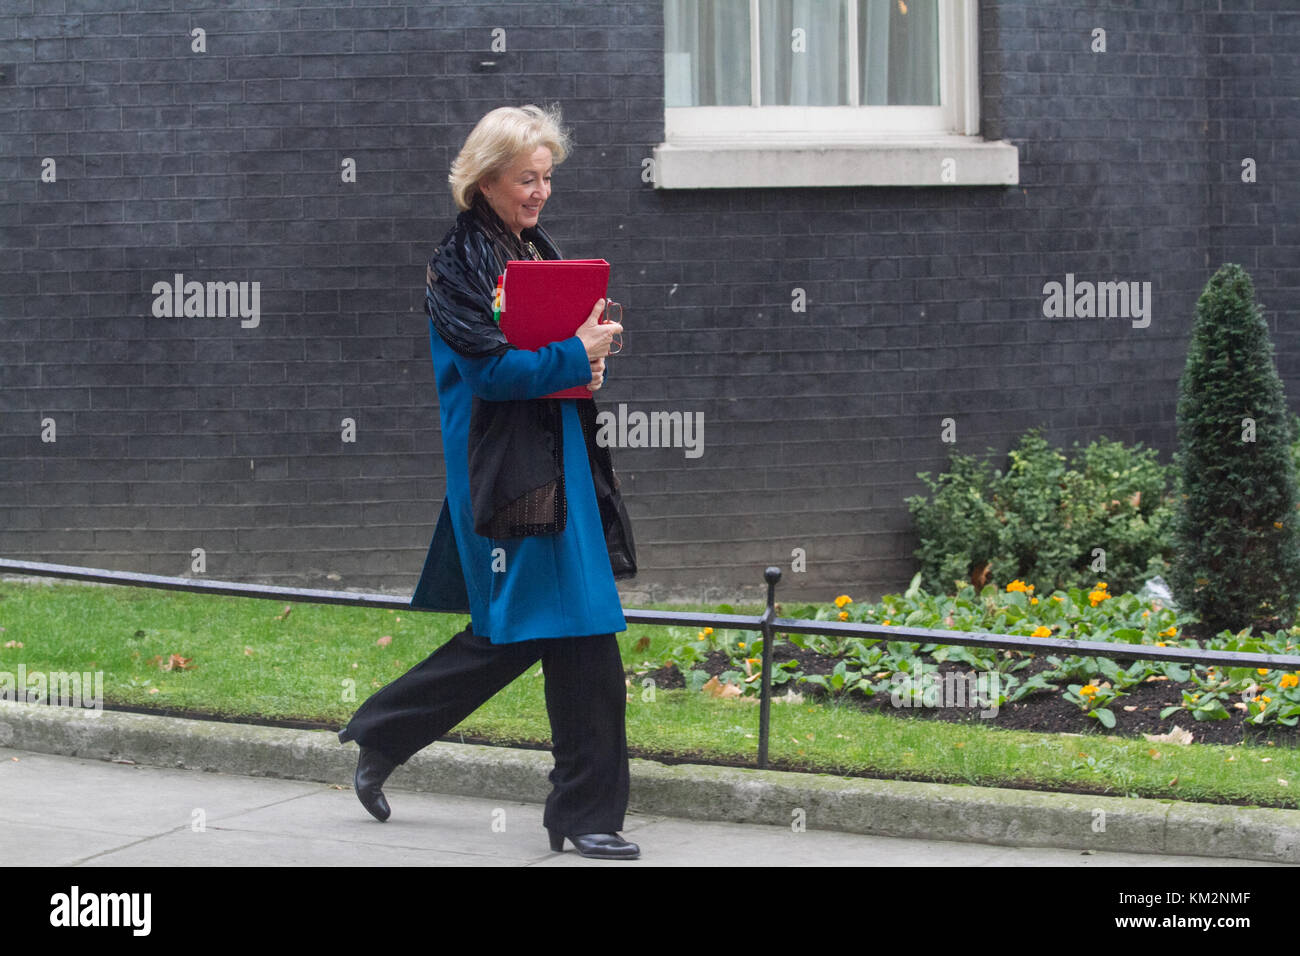 London UK. 4th December 2017. British Cabinet Minister Andrea Leadsom MP leaves Downing Street. Andrea Leadsom serves as Lord President of the Council and Leader of the House of Commons Credit: amer ghazzal/Alamy Live News  Stock Photo